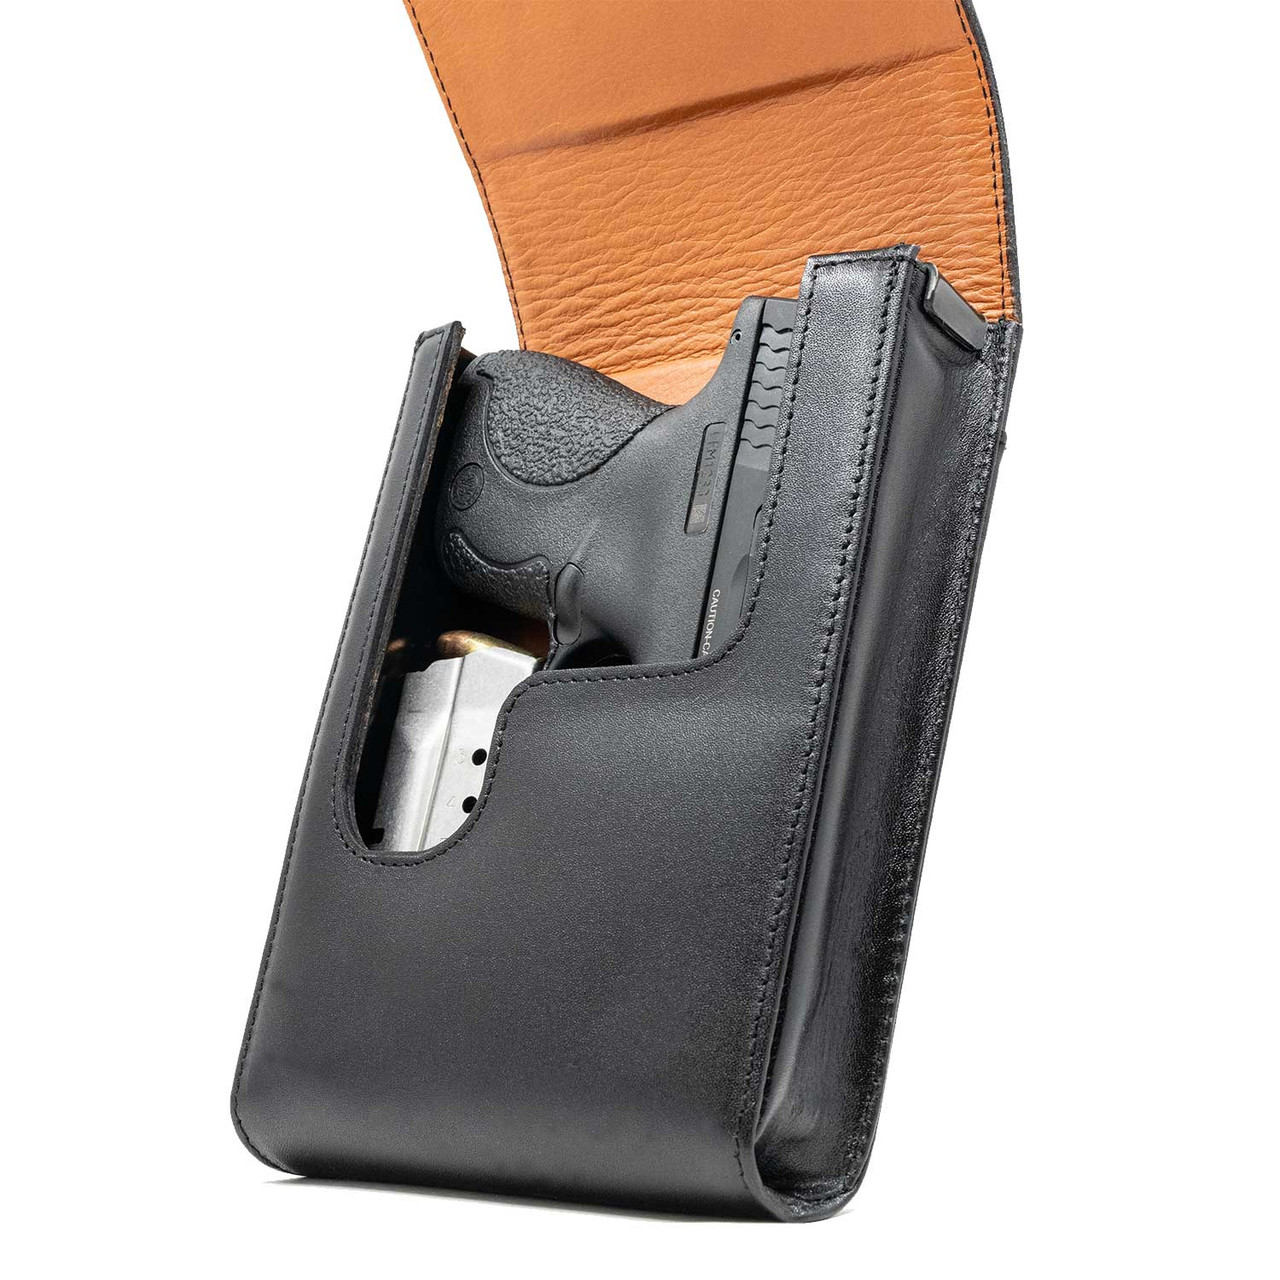 The Ruger American 9 Compact Xtra Mag Black Leather Holster